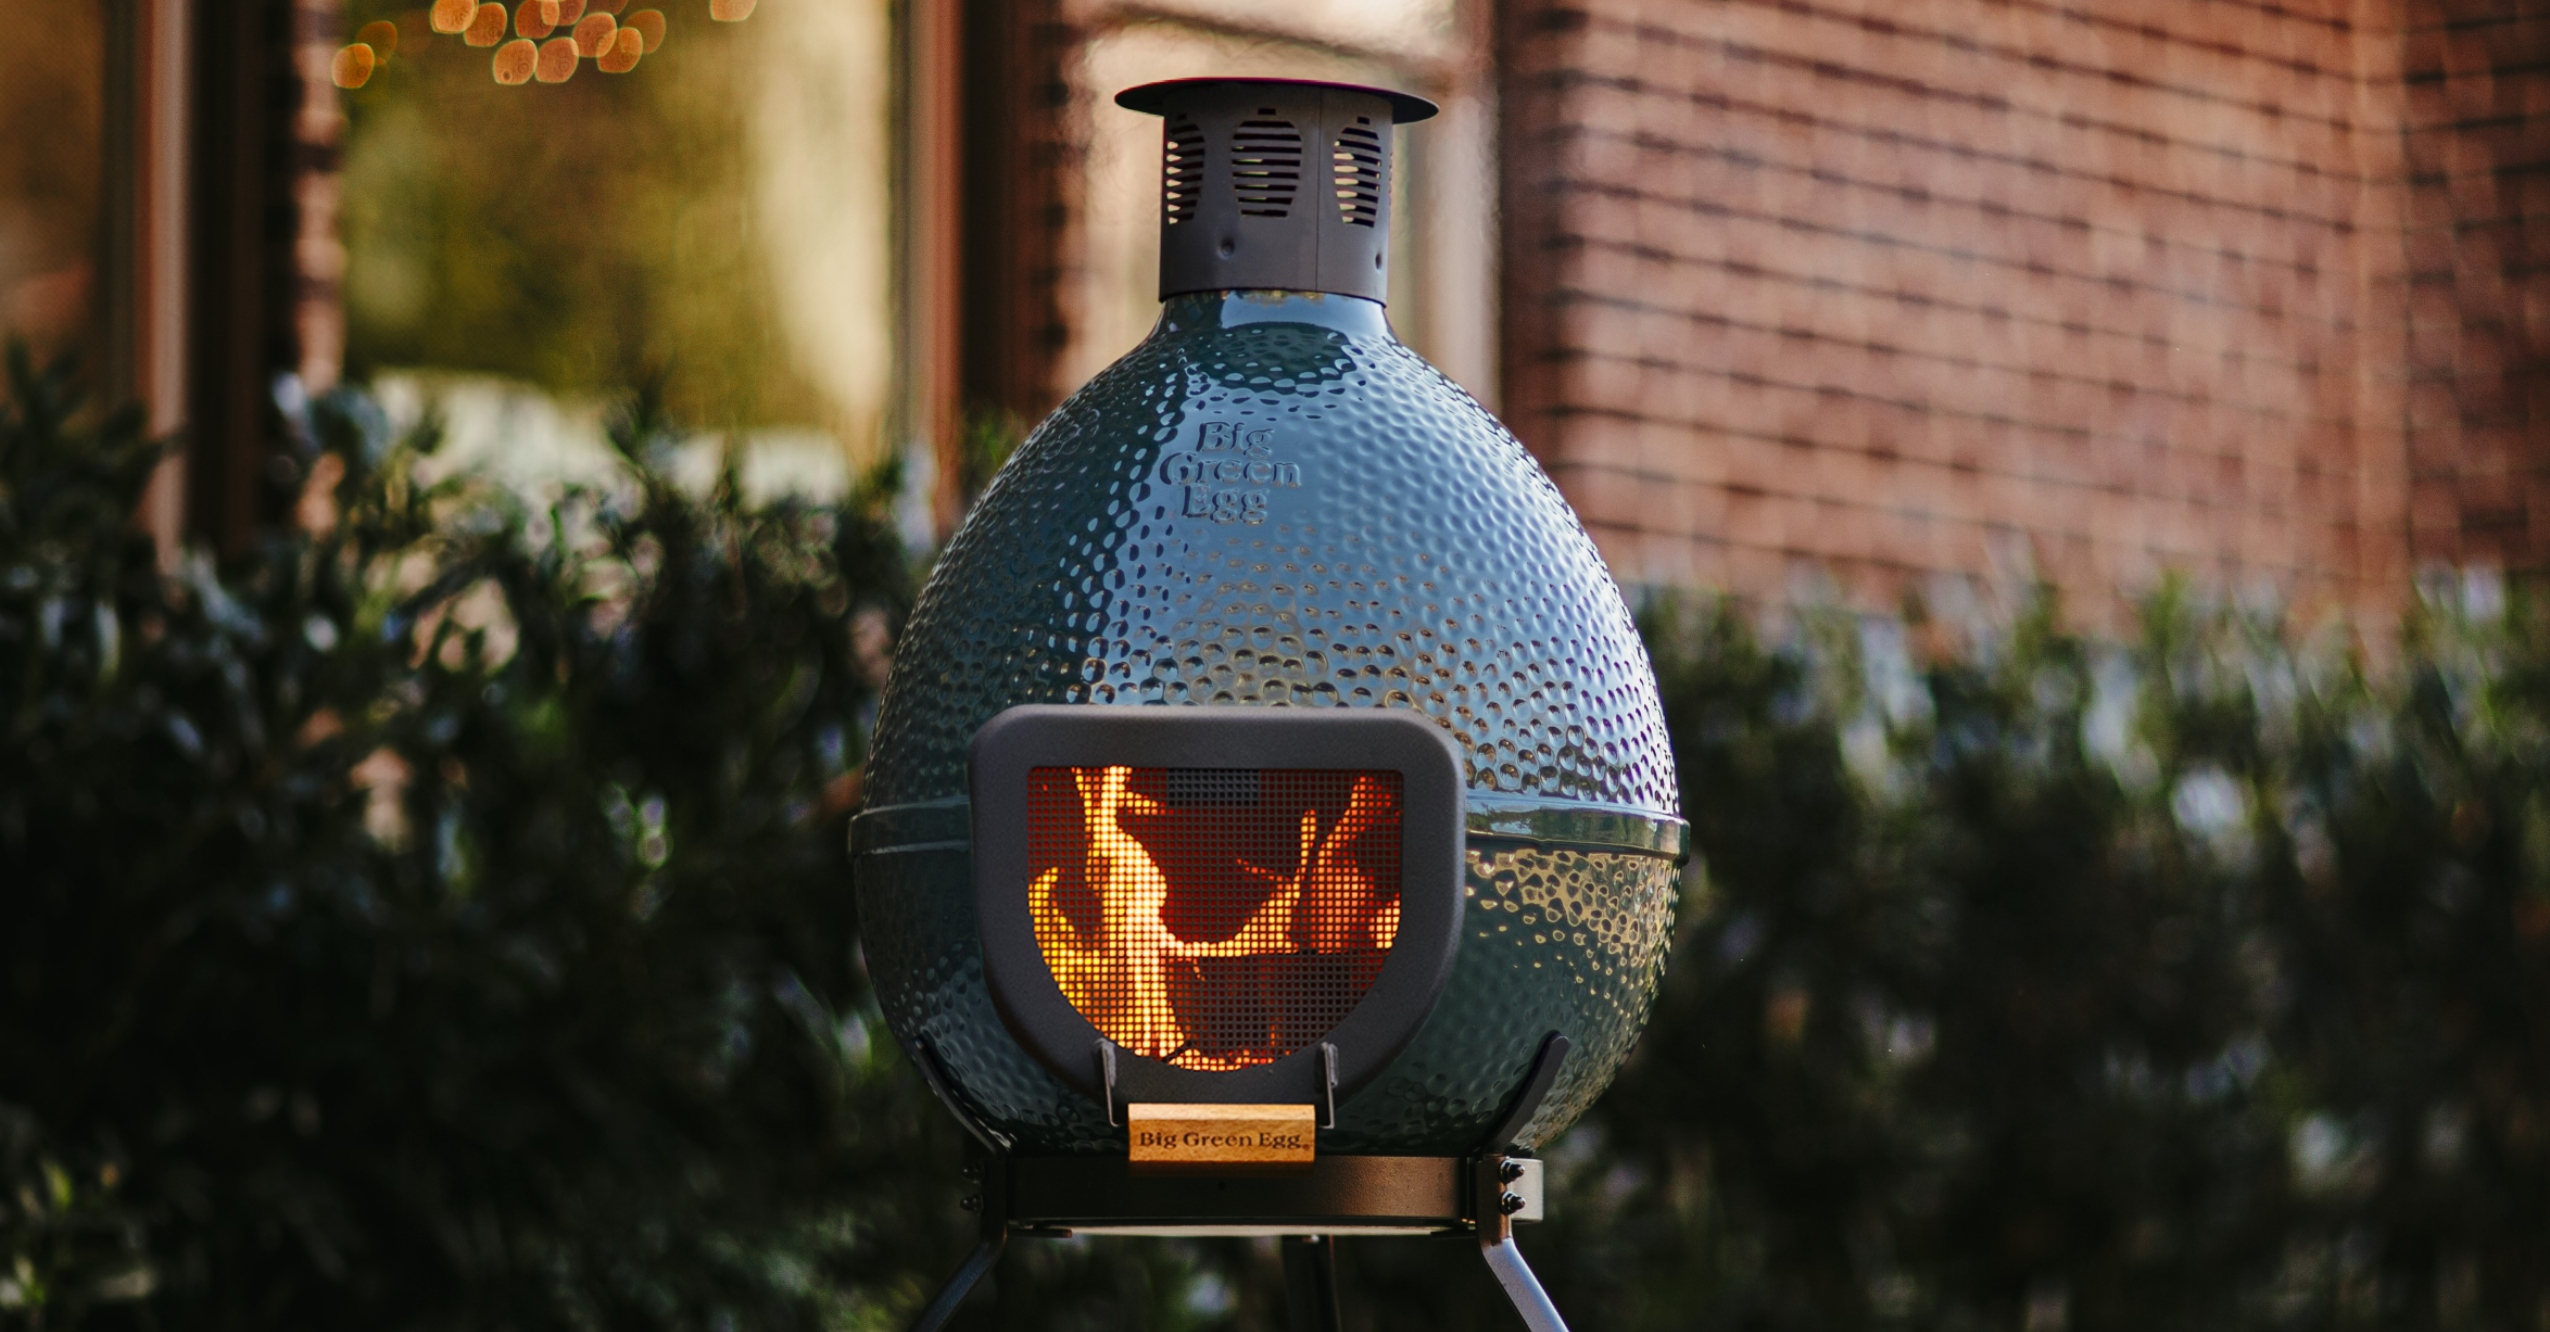 Big Green Egg Brings Back Chiminea For Grill Brand’s 50th Anniversary